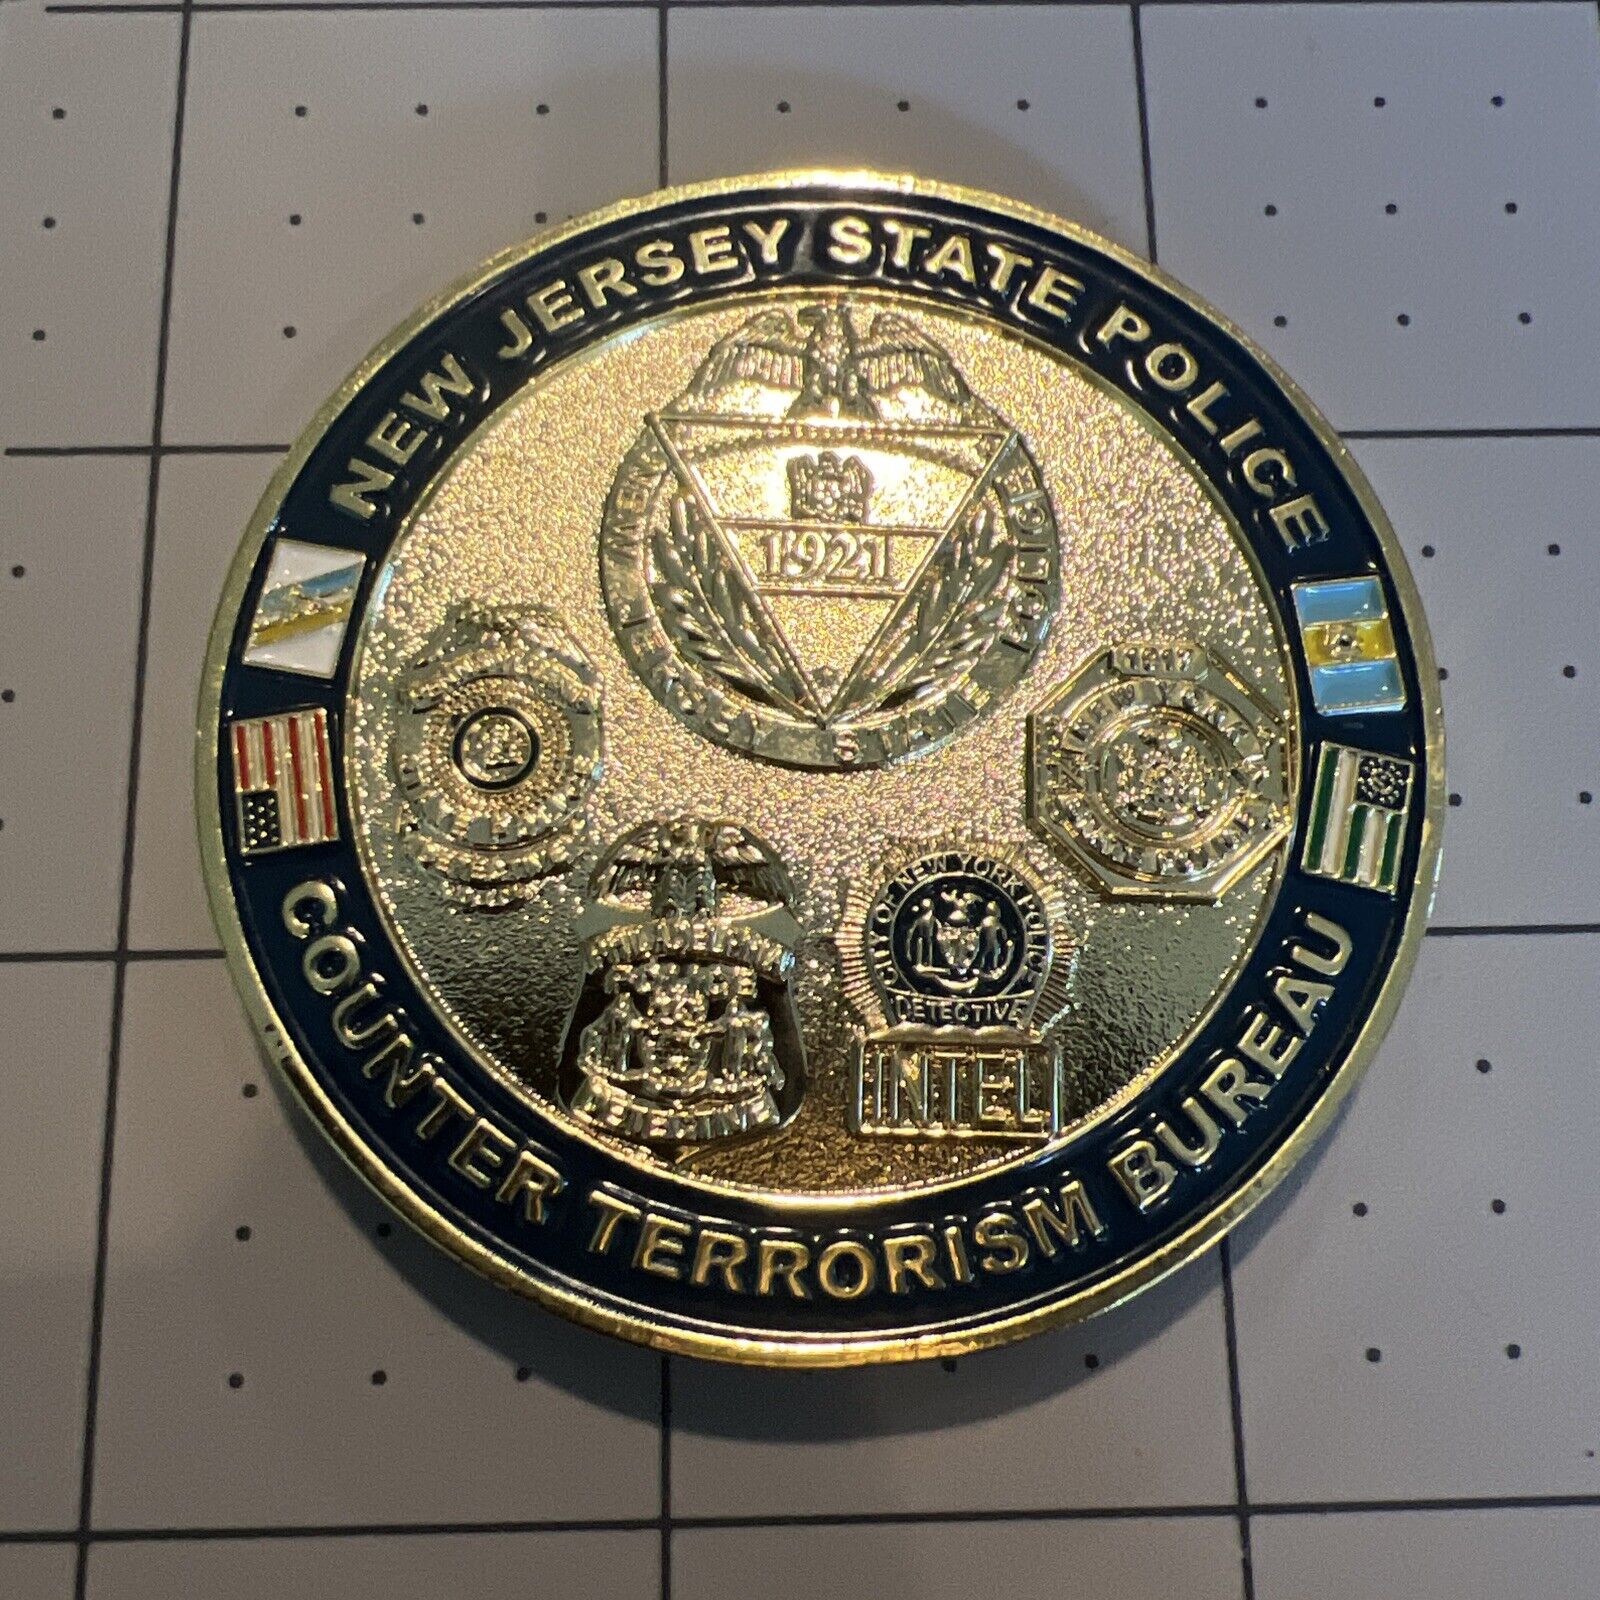 Nypd FBI New York PA New Jersey State Police Challenge Coin Counter Terrorism